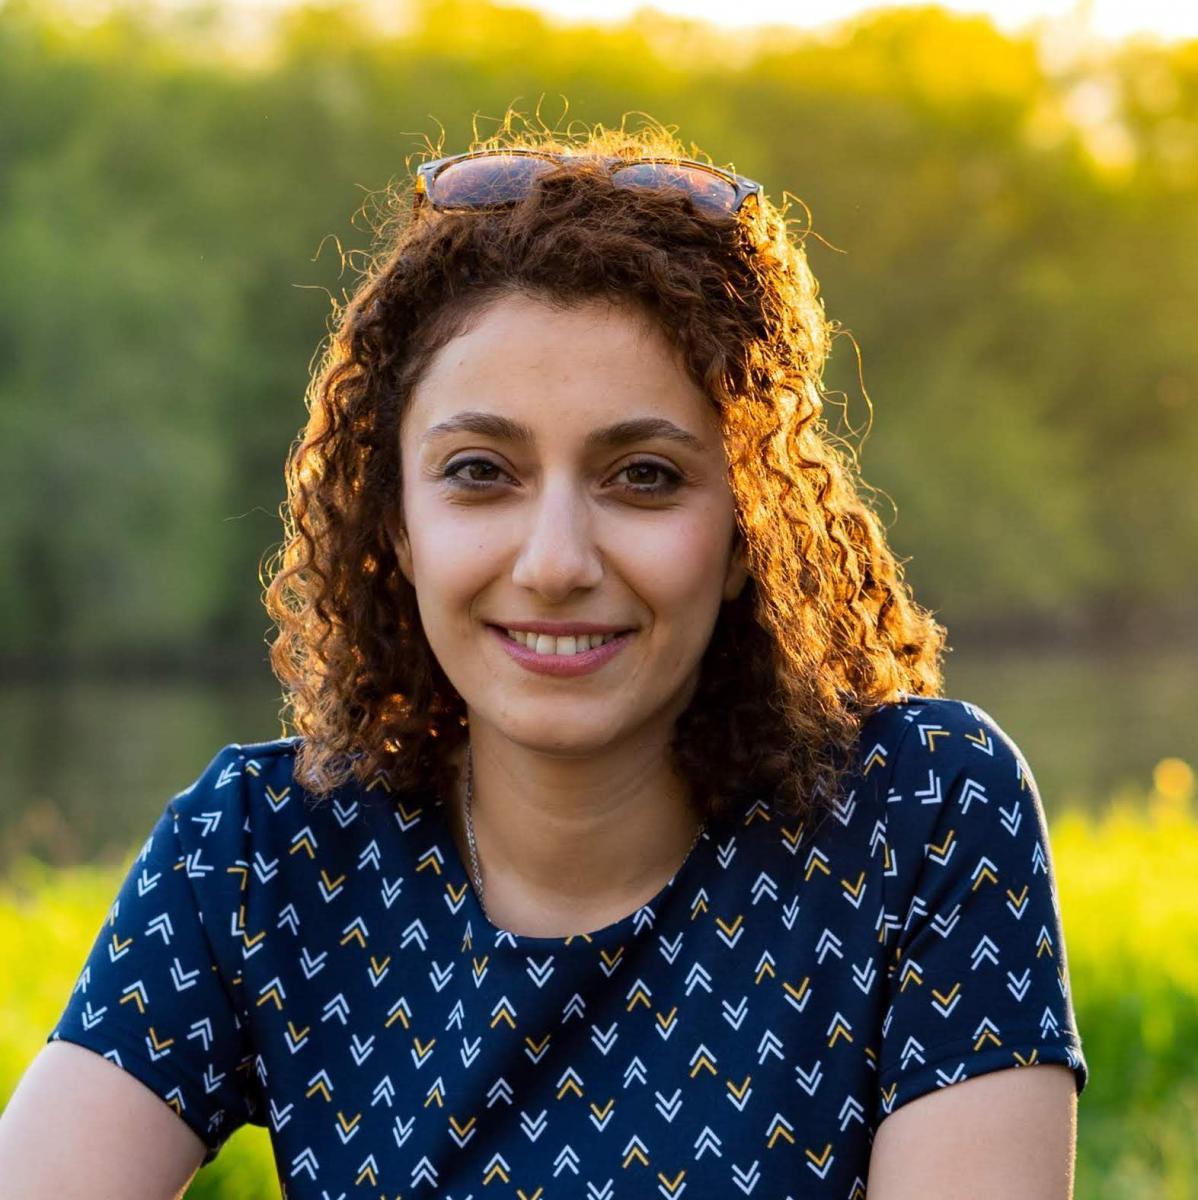 Dr. Mitra Asgari outside with out-of-focus greenery in the background weating a blue short-sleeved blouse with white and yellow chevrons and sunglasses on top of her head